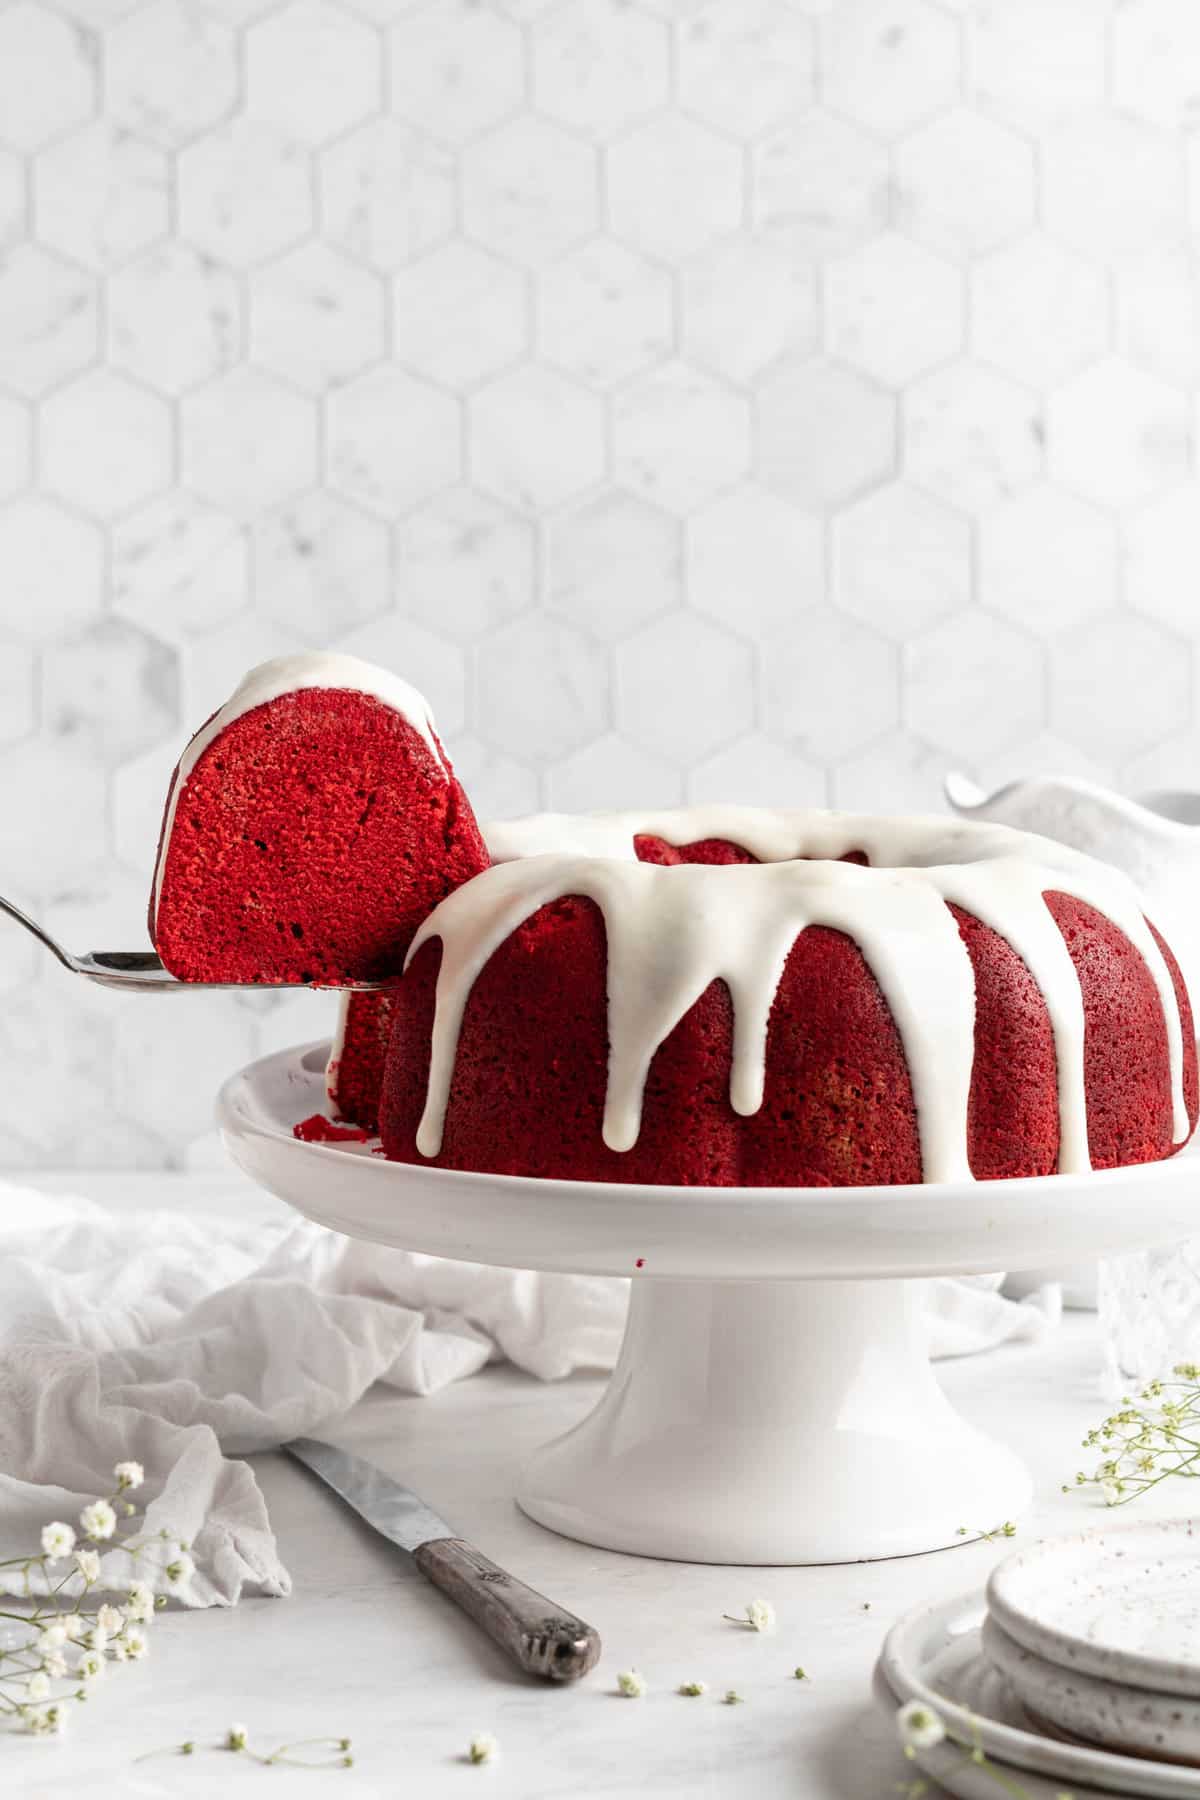 Testing 8 Silicone Bundt Pans Part 1 - Vanilla and Strawberry Bundt Cakes  